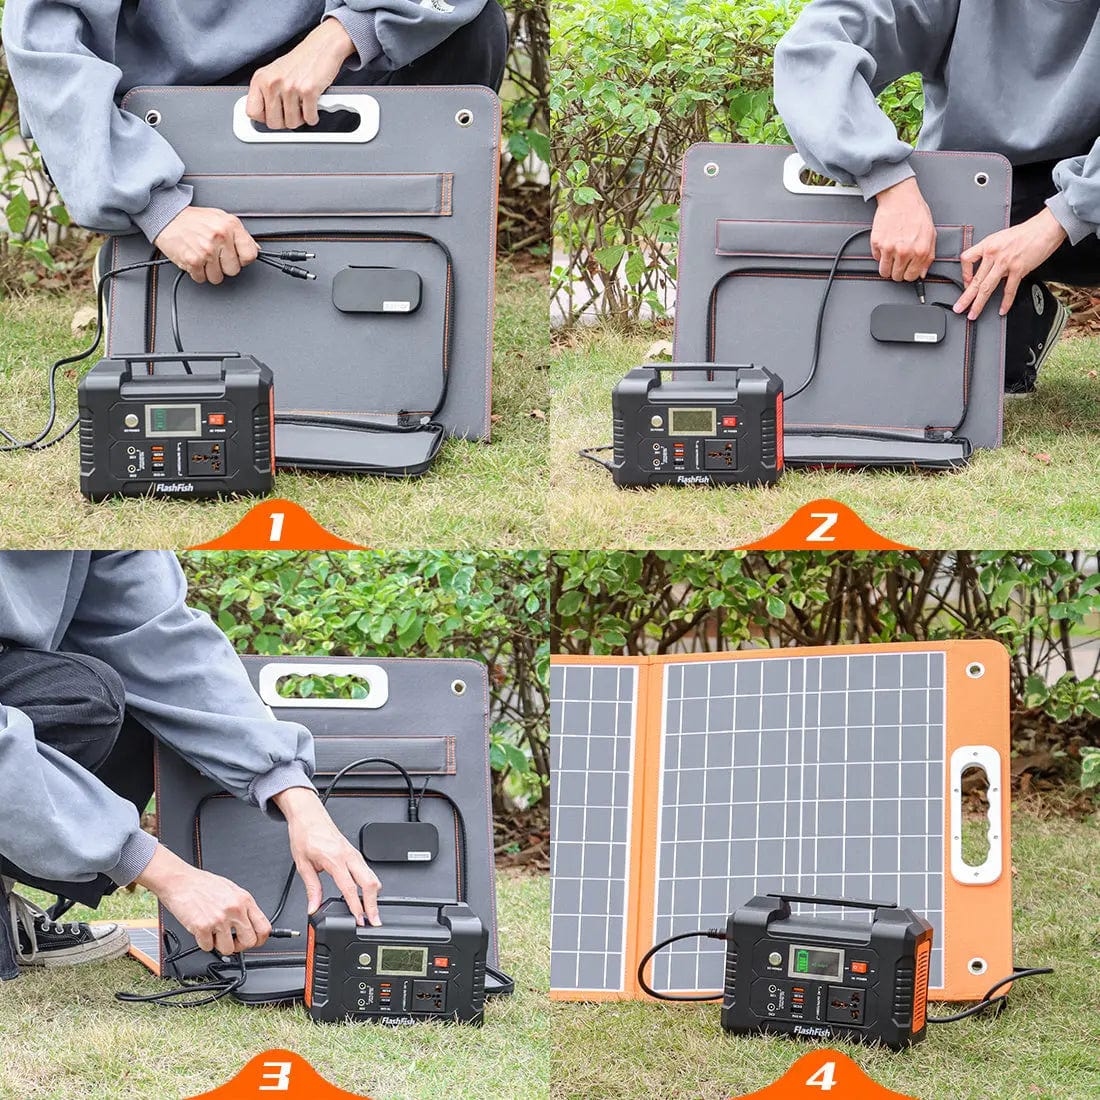 60W 18V Portable Solar Panel;  Flashfish Foldable Solar Charger with Lighting  MPGD Corp Merchandise